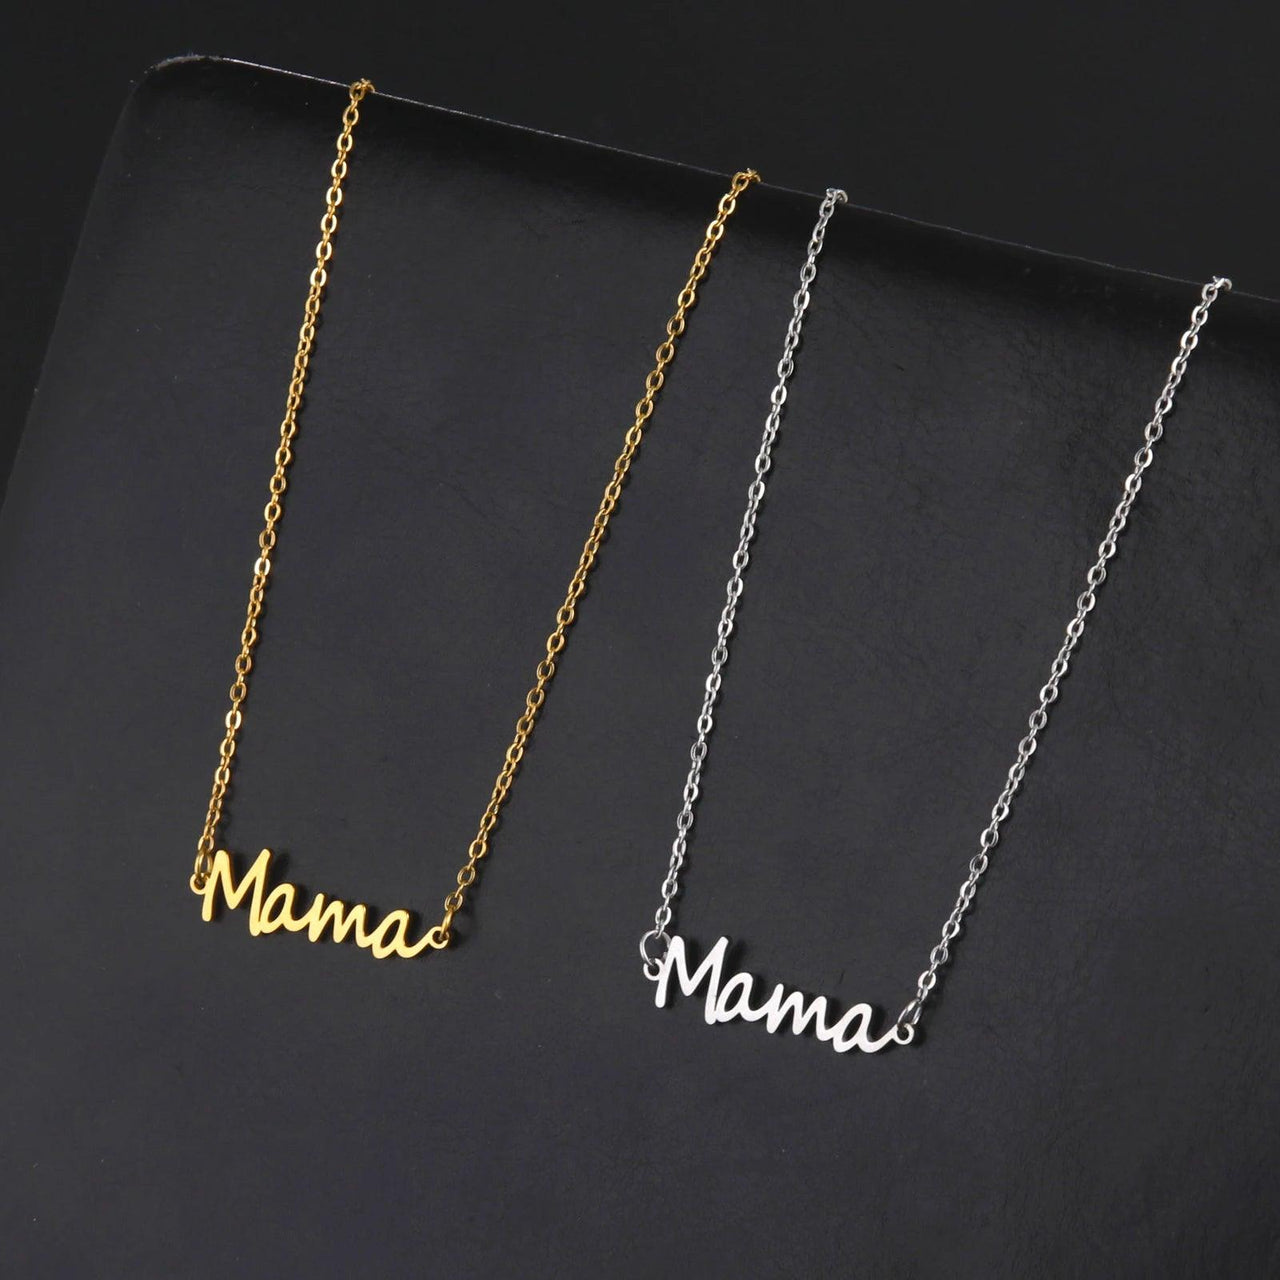 Trendy Stainless Steel "Mama" Pendant Necklace By Amexer - God's Girl Gifts And Apparel